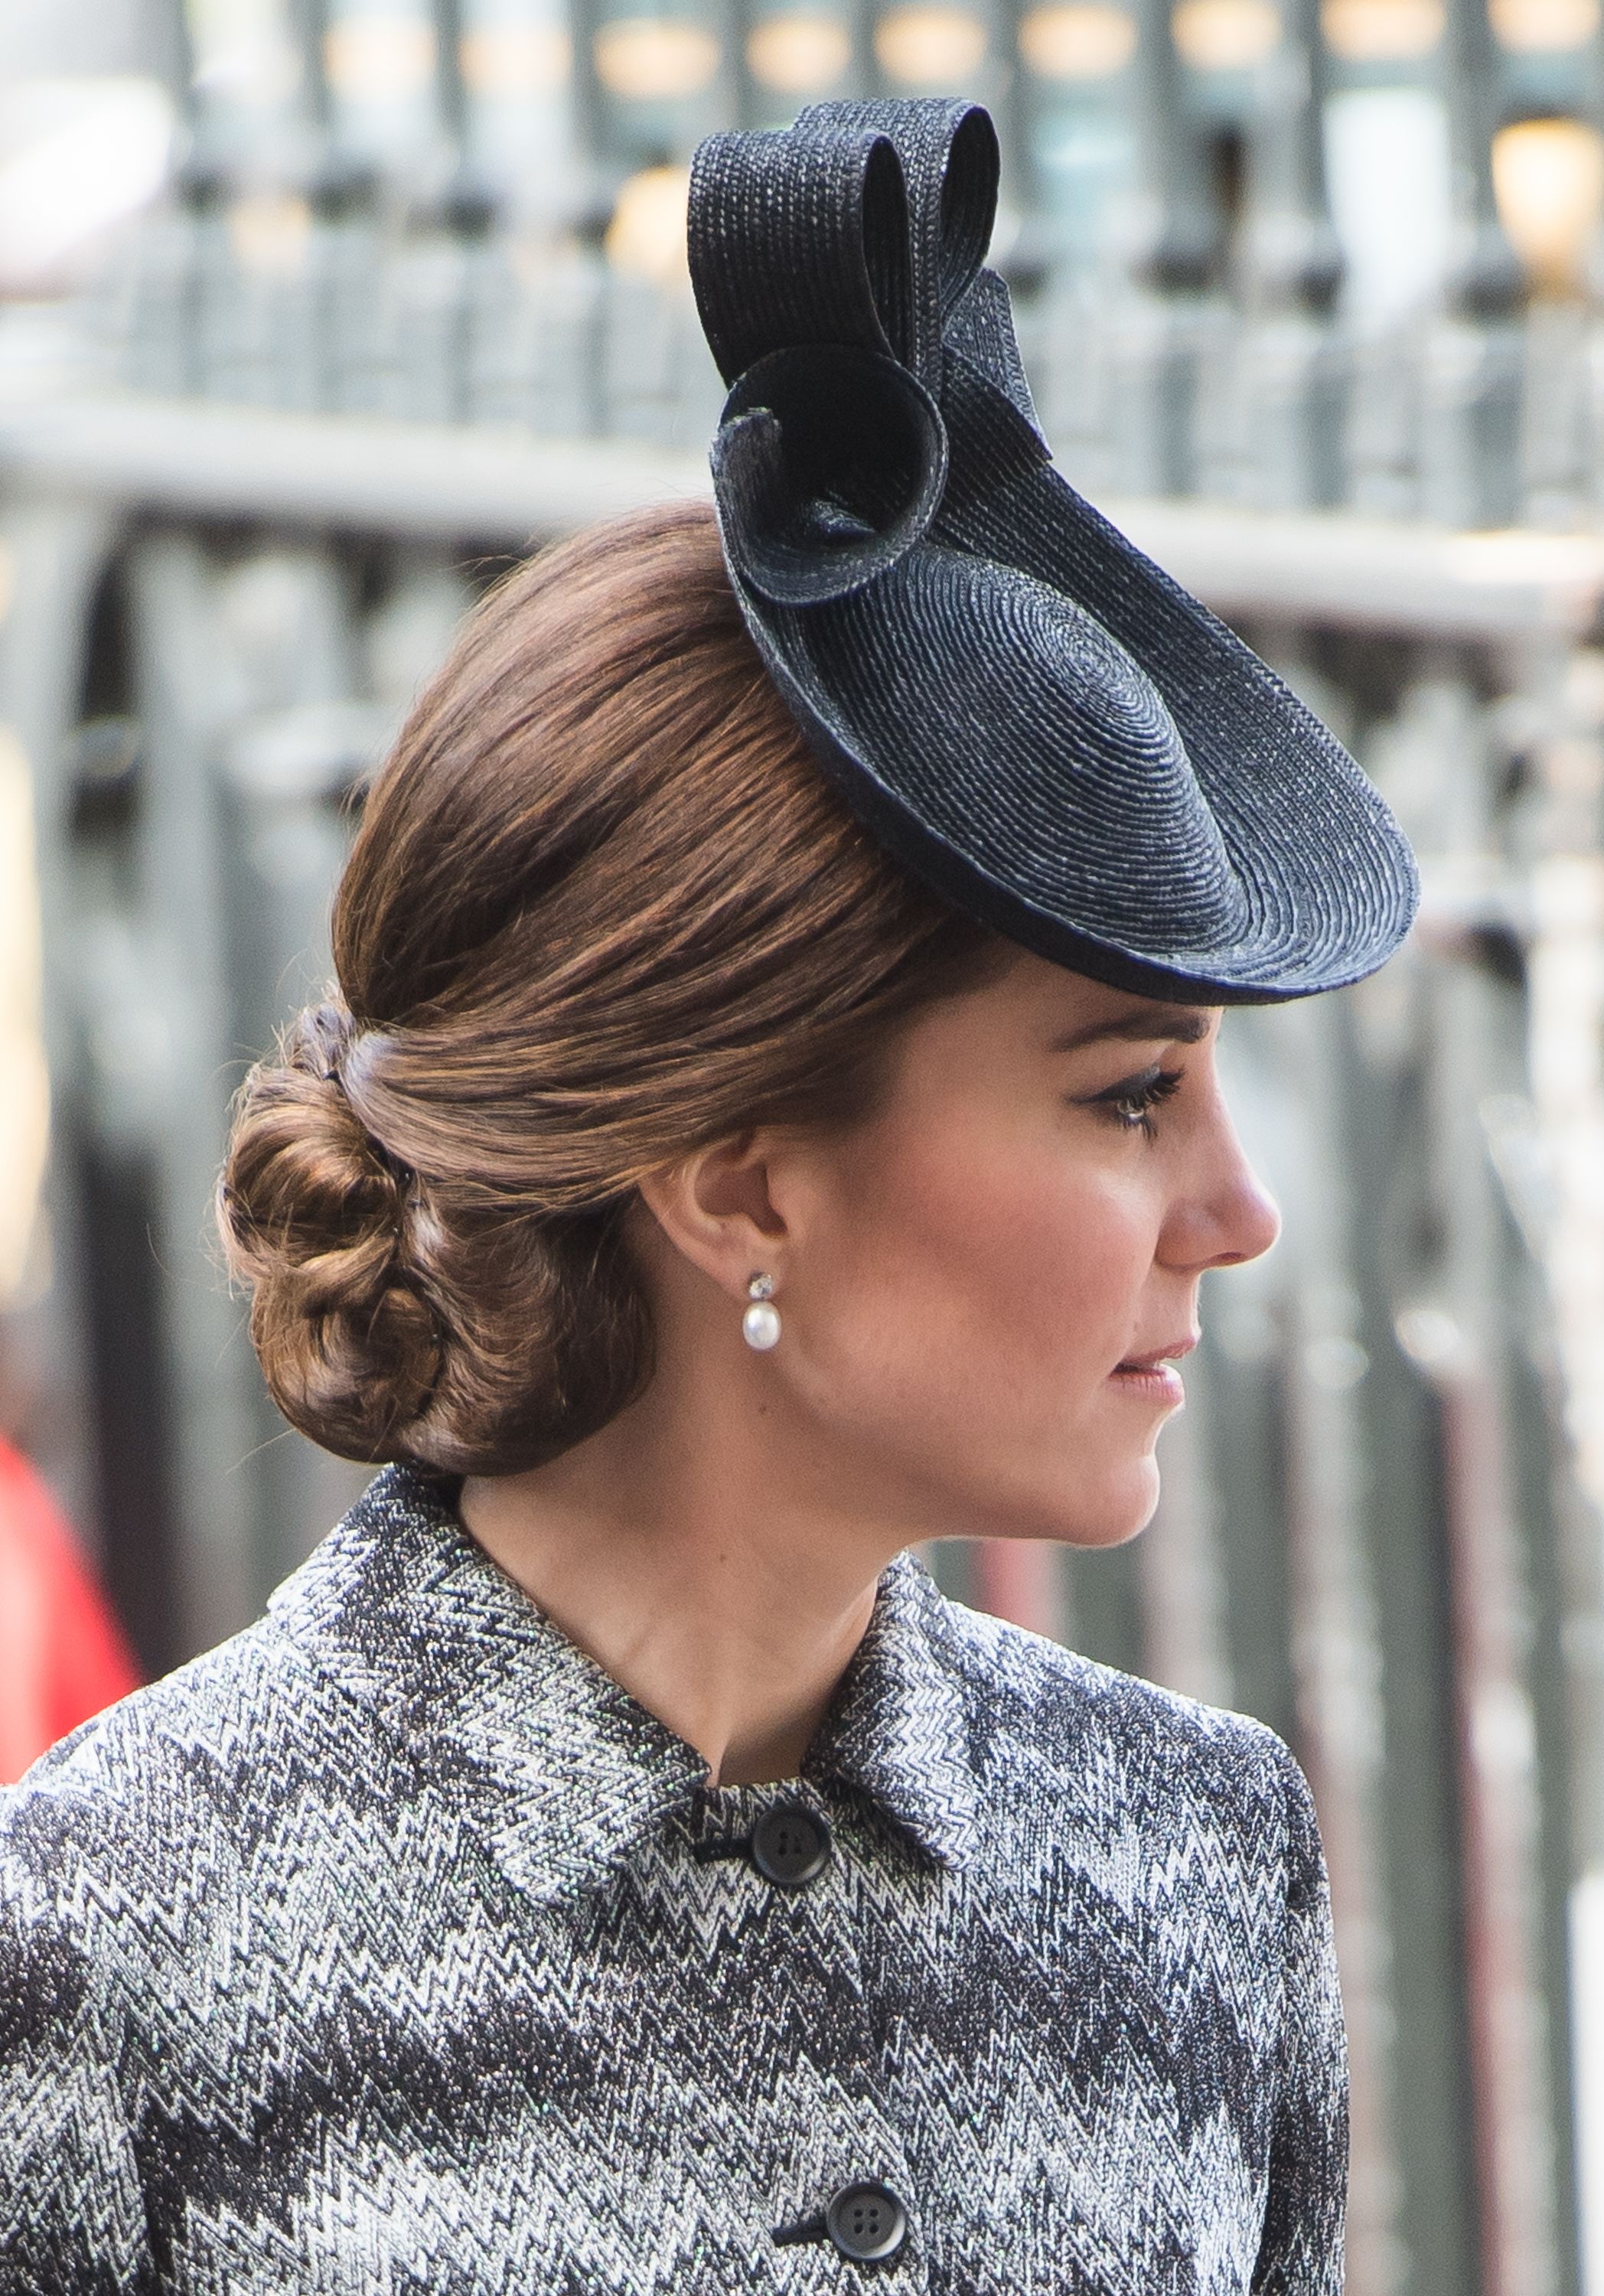 30 Best Royal Hairstyles Of All Time - Photos